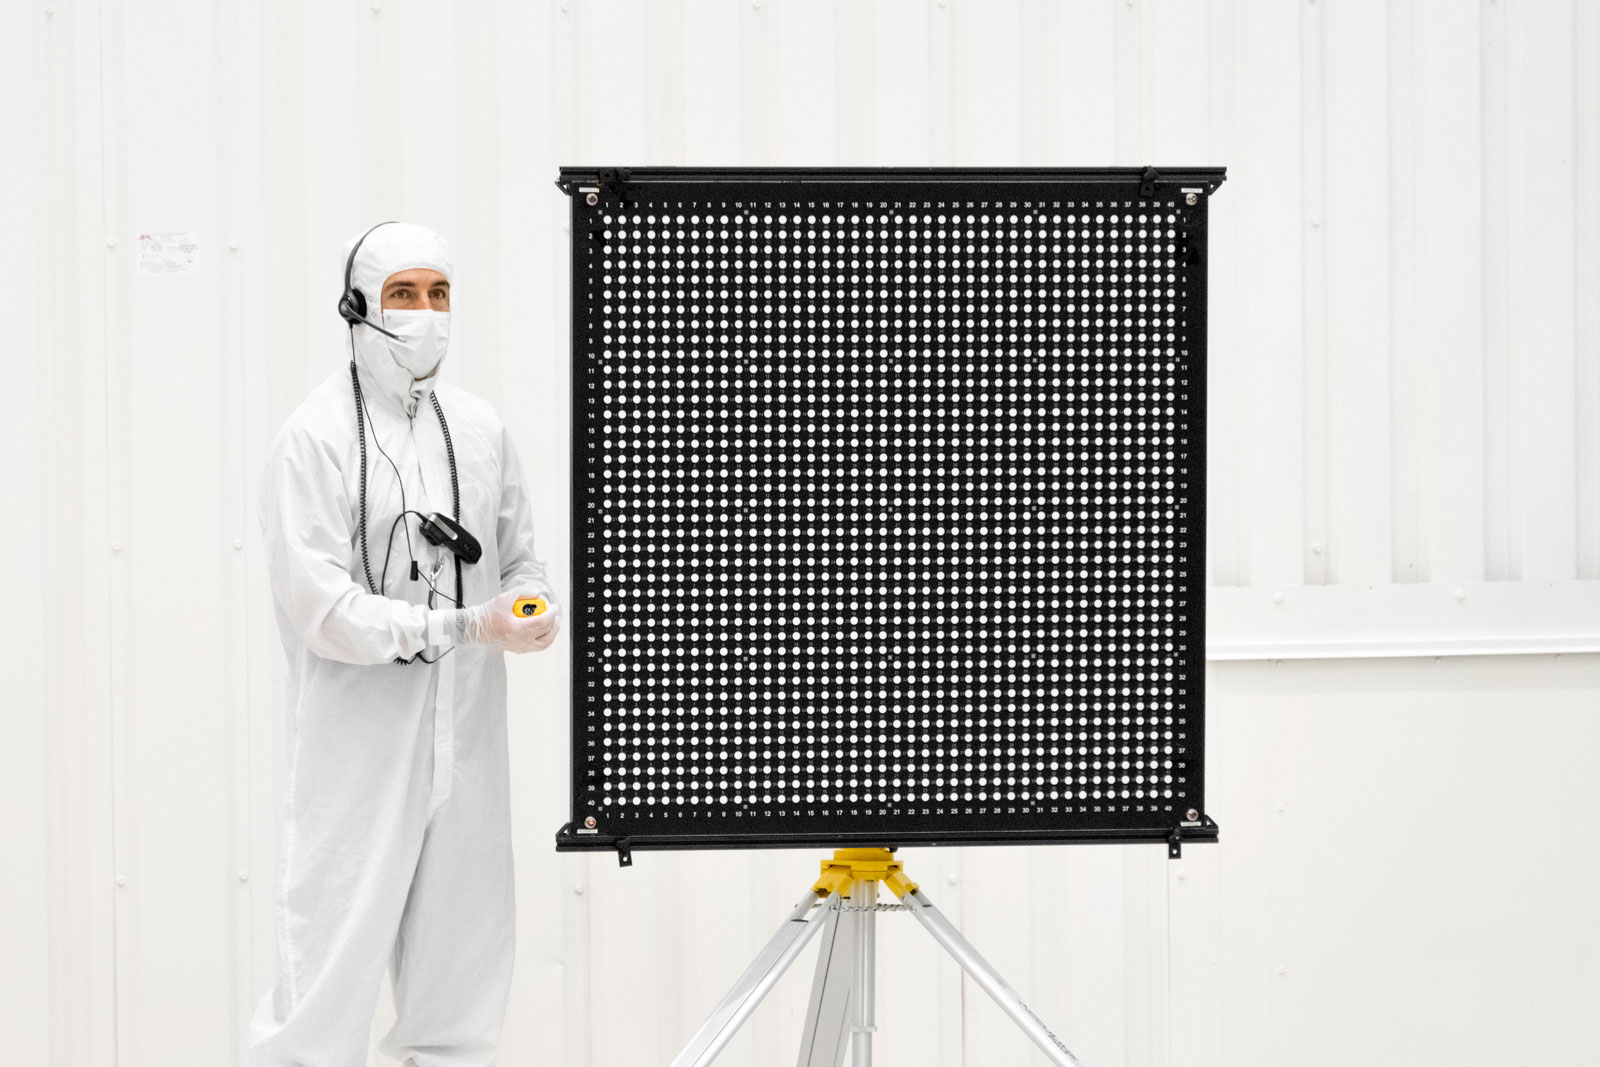 Engineer Chris Chatellier stands next to a target board with 1,600 dots. The board was one of several used on July 23, 2019, in the Spacecraft Assembly Facility's High Bay 1 at NASA's Jet Propulsion Laboratory in Pasadena, California, to calibrate the forward-facing cameras on the Mars 2020 rover.